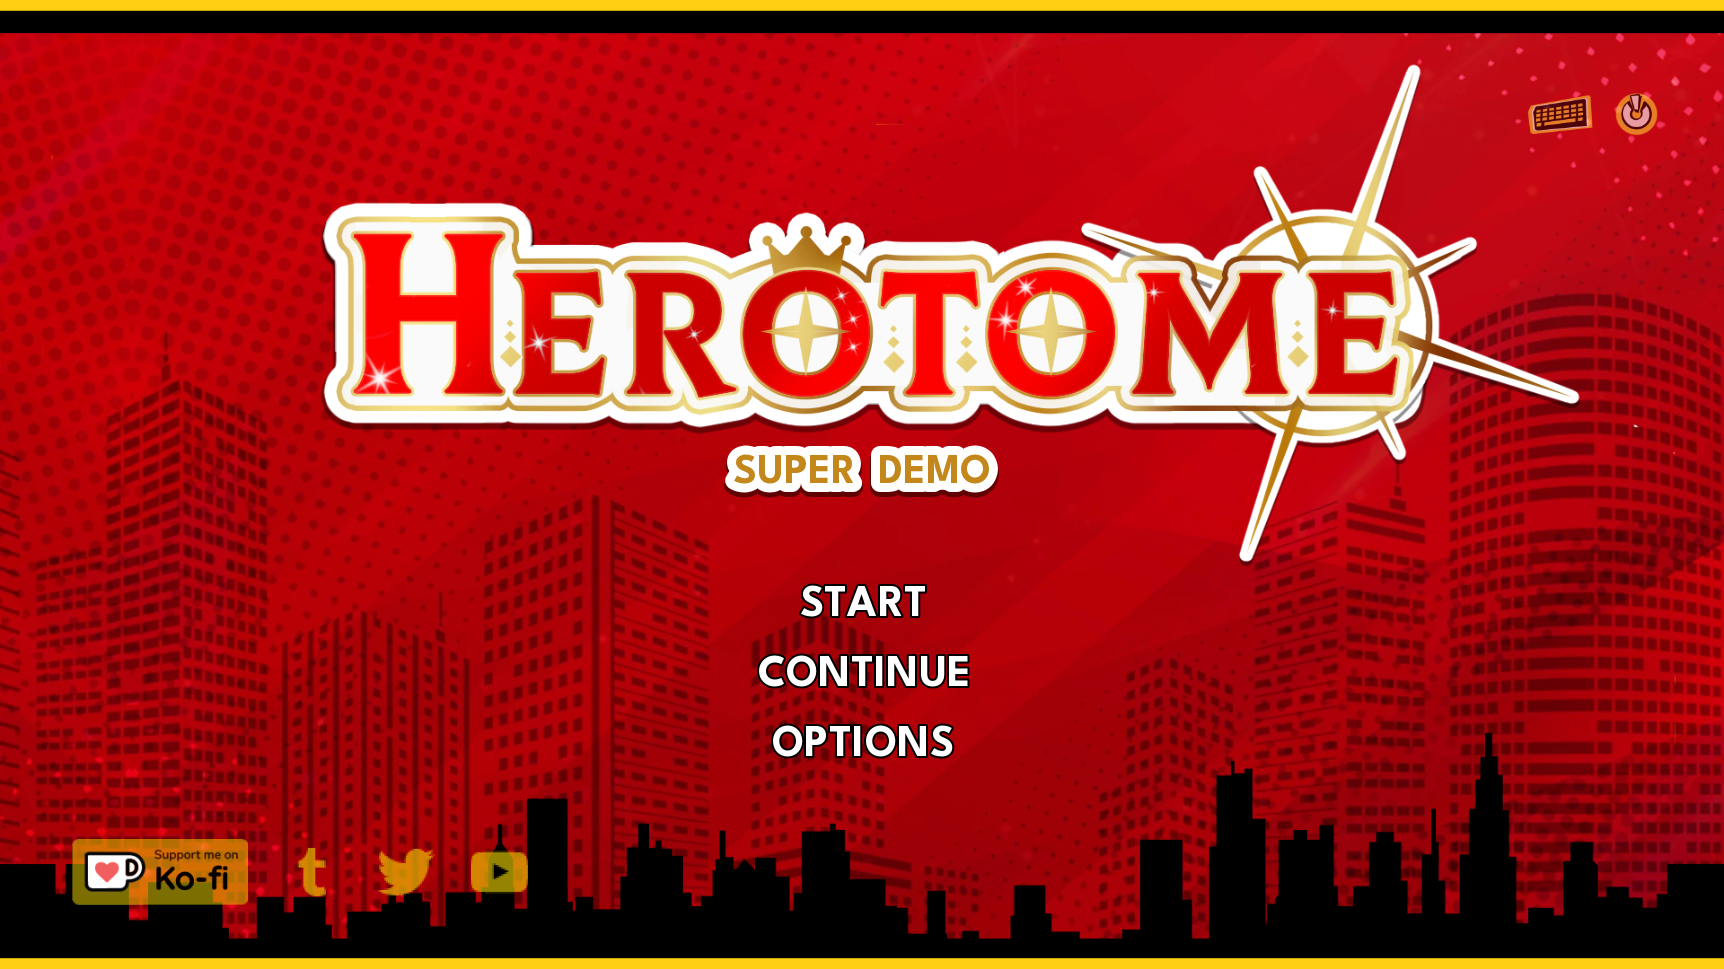 HEROTOME [Super Demo] by Wudgeous